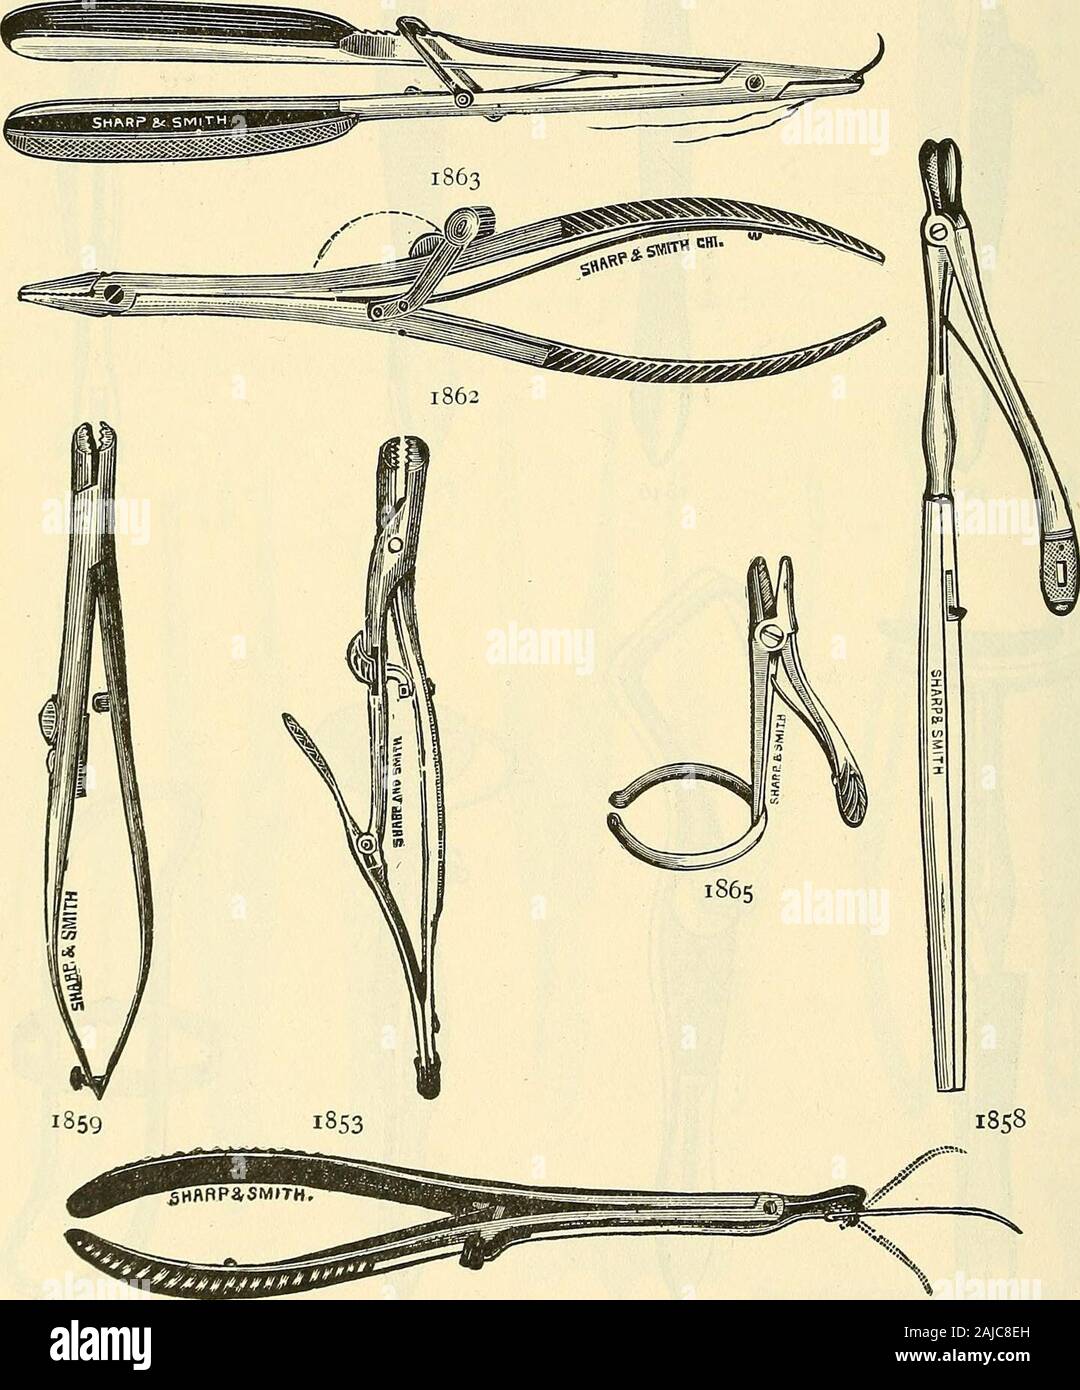 Catalogue of Sharp & Smith : importers, manufacturers, wholesale and retail dealers in surgical instruments, deformity apparatus, artificial limbs, artificial eyes, elastic stockings, trusses, crutches, supporters, galvanic and faradic batteries, etc., surgeons' appliances of every description . 1856—A 382 SHARP &. SMITH. CHICAGO. *iS57 *i858 *i859 i860 1861 *i862 *i863 *i864 *i865 1866 EYE INSTRUMENTS. Needle Holding Forceps, Sands $ 3 00 Knapps, very delicate 4 00 Prouts .... 2 60 Whitneys 3 25 Collins 325 Reniers 3 00 Russian 3 00 Paris 350 Galezowskys 2 25 Hagedorns 6 00 For other Needle H Stock Photo